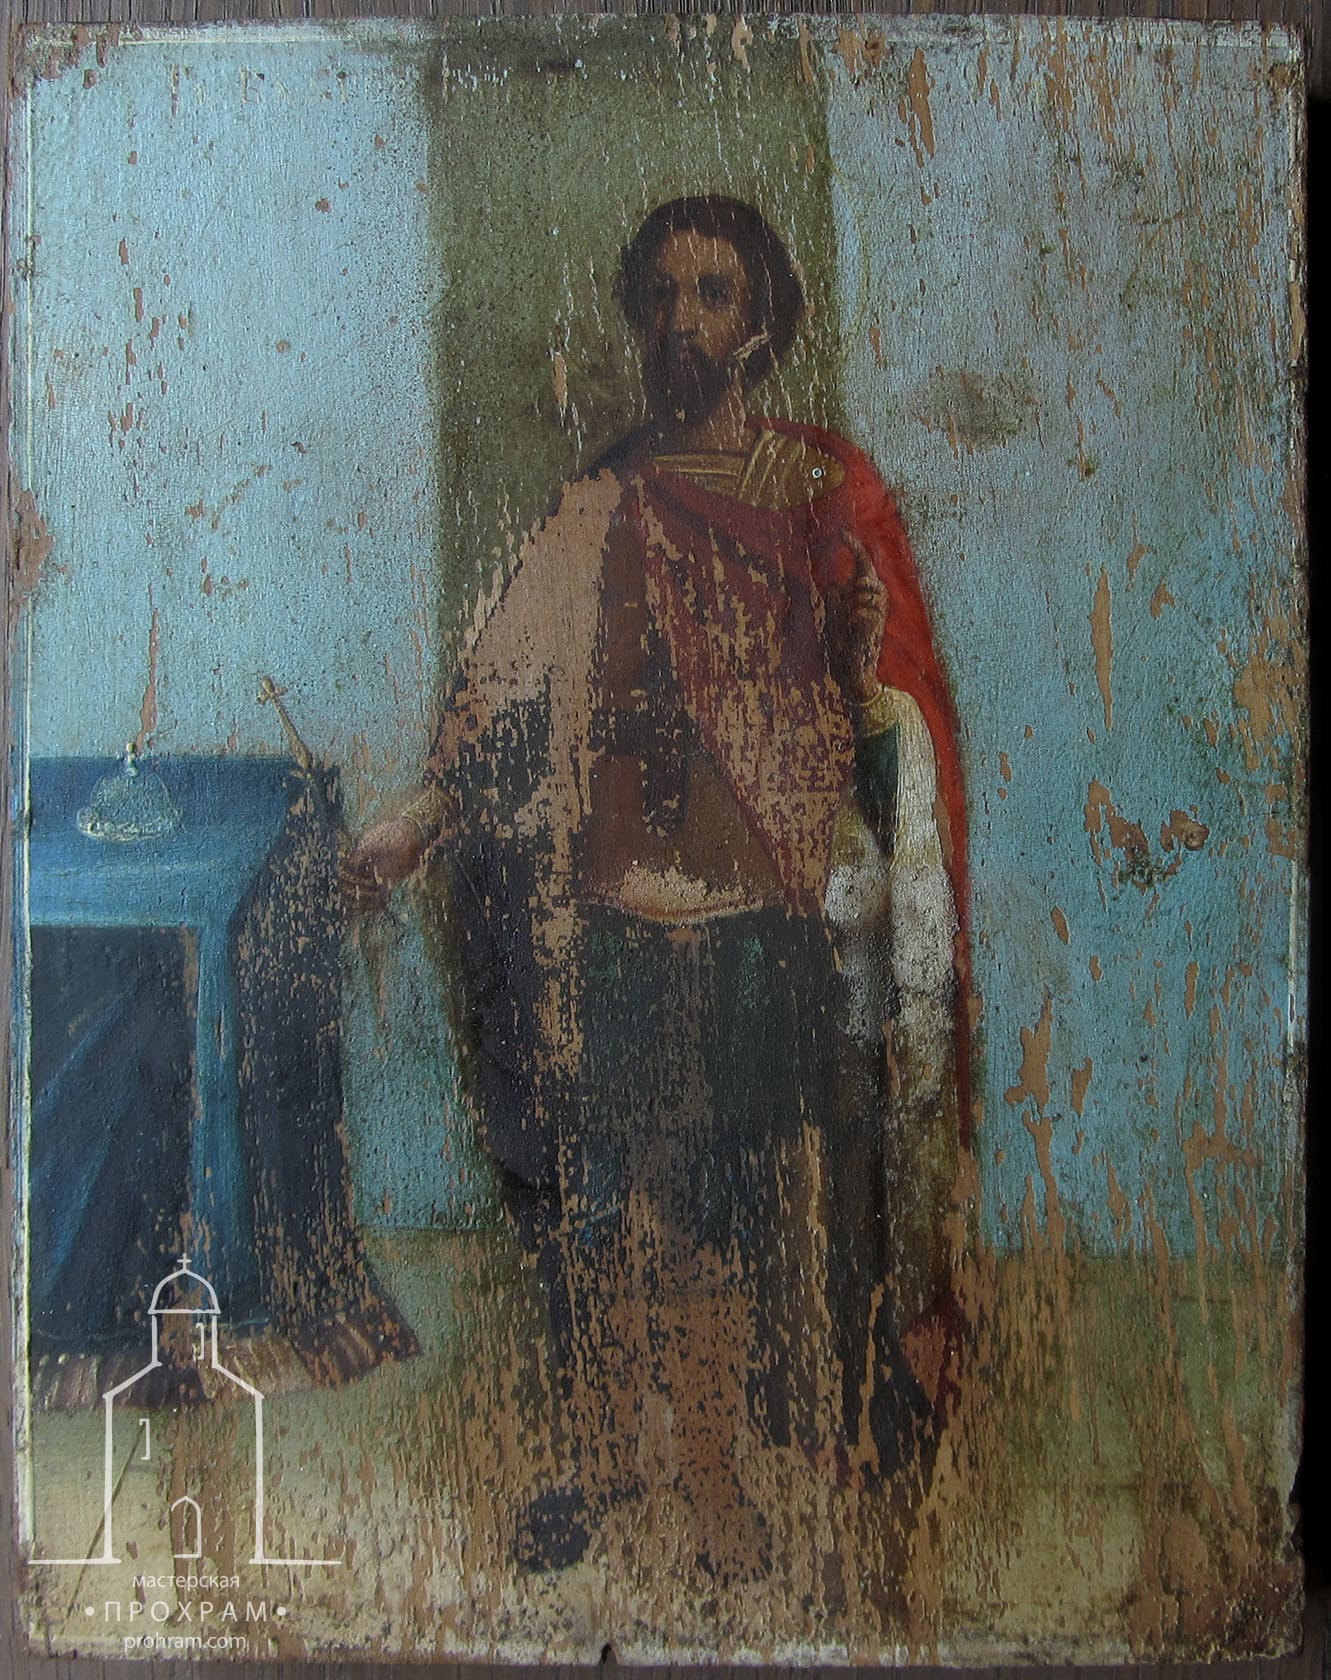 restoration, restoration of icons, Icon of Holy Right-Believing Prince Alexander Nevsky, late 19th century